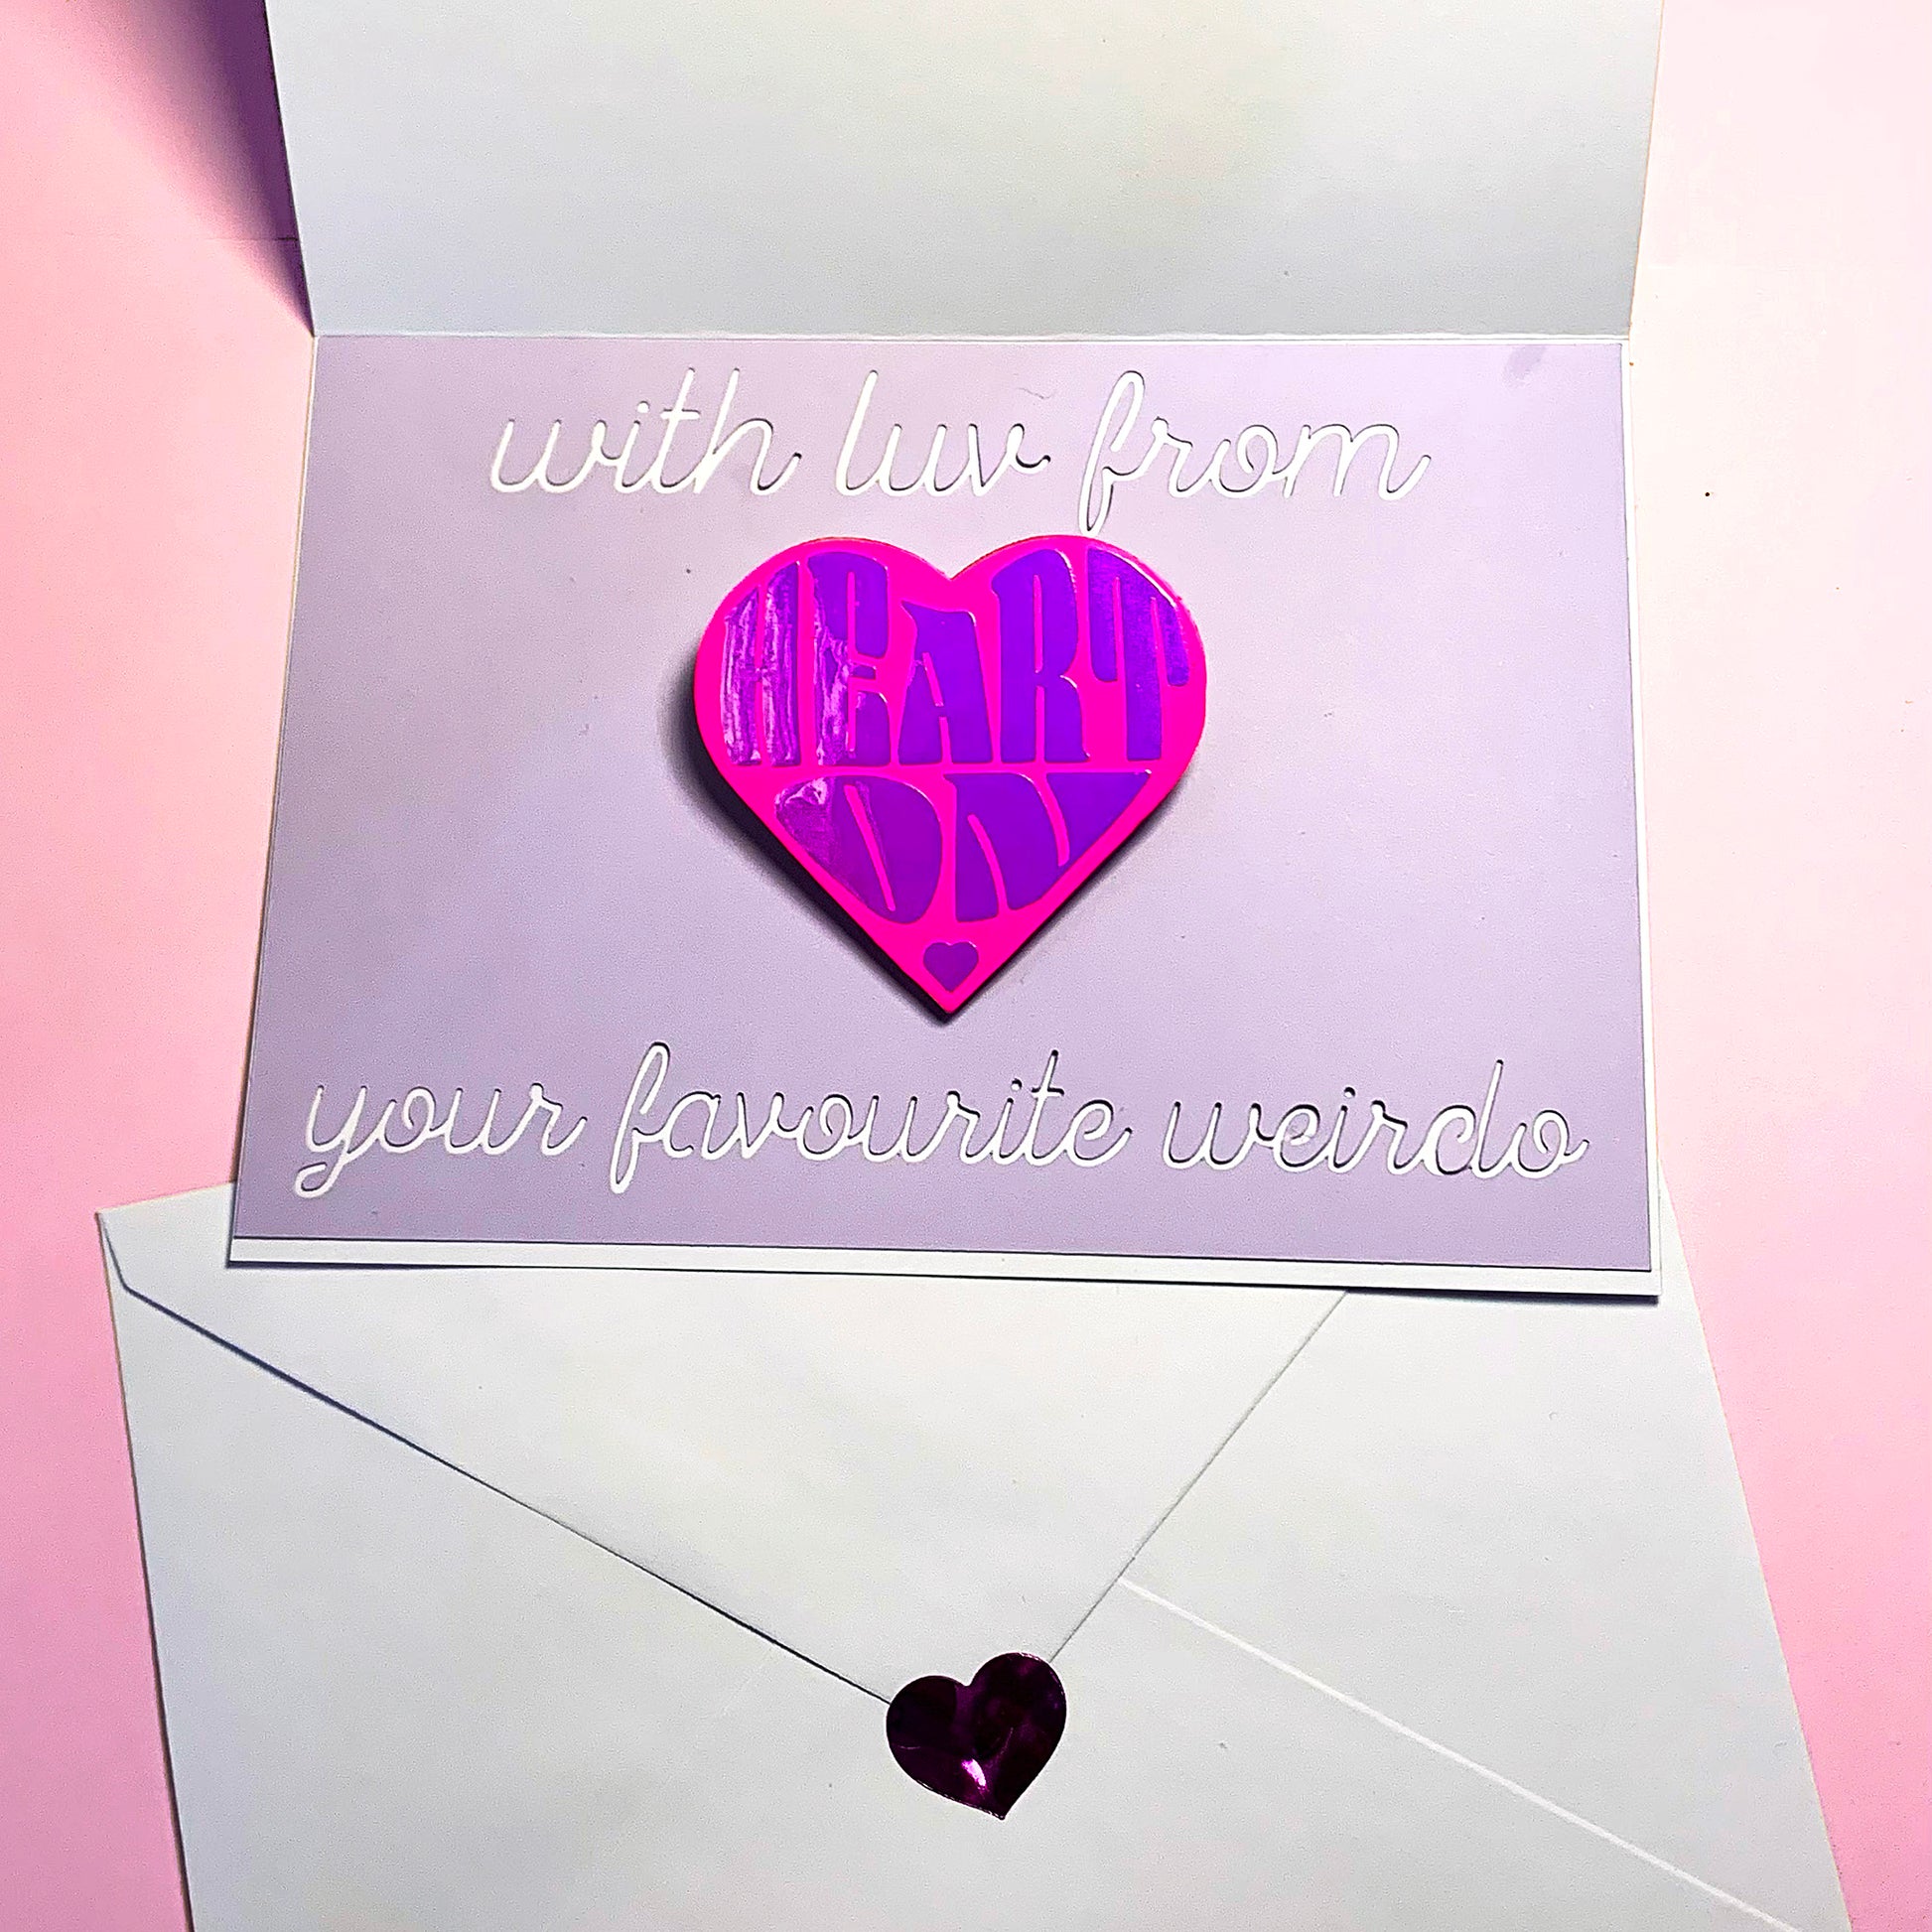 "Heart On" heart-shaped pin - holo pearl & neon pink option, packaged with personal message "with luv from your favourite weirdo" cut in lavender & white card, envelope set